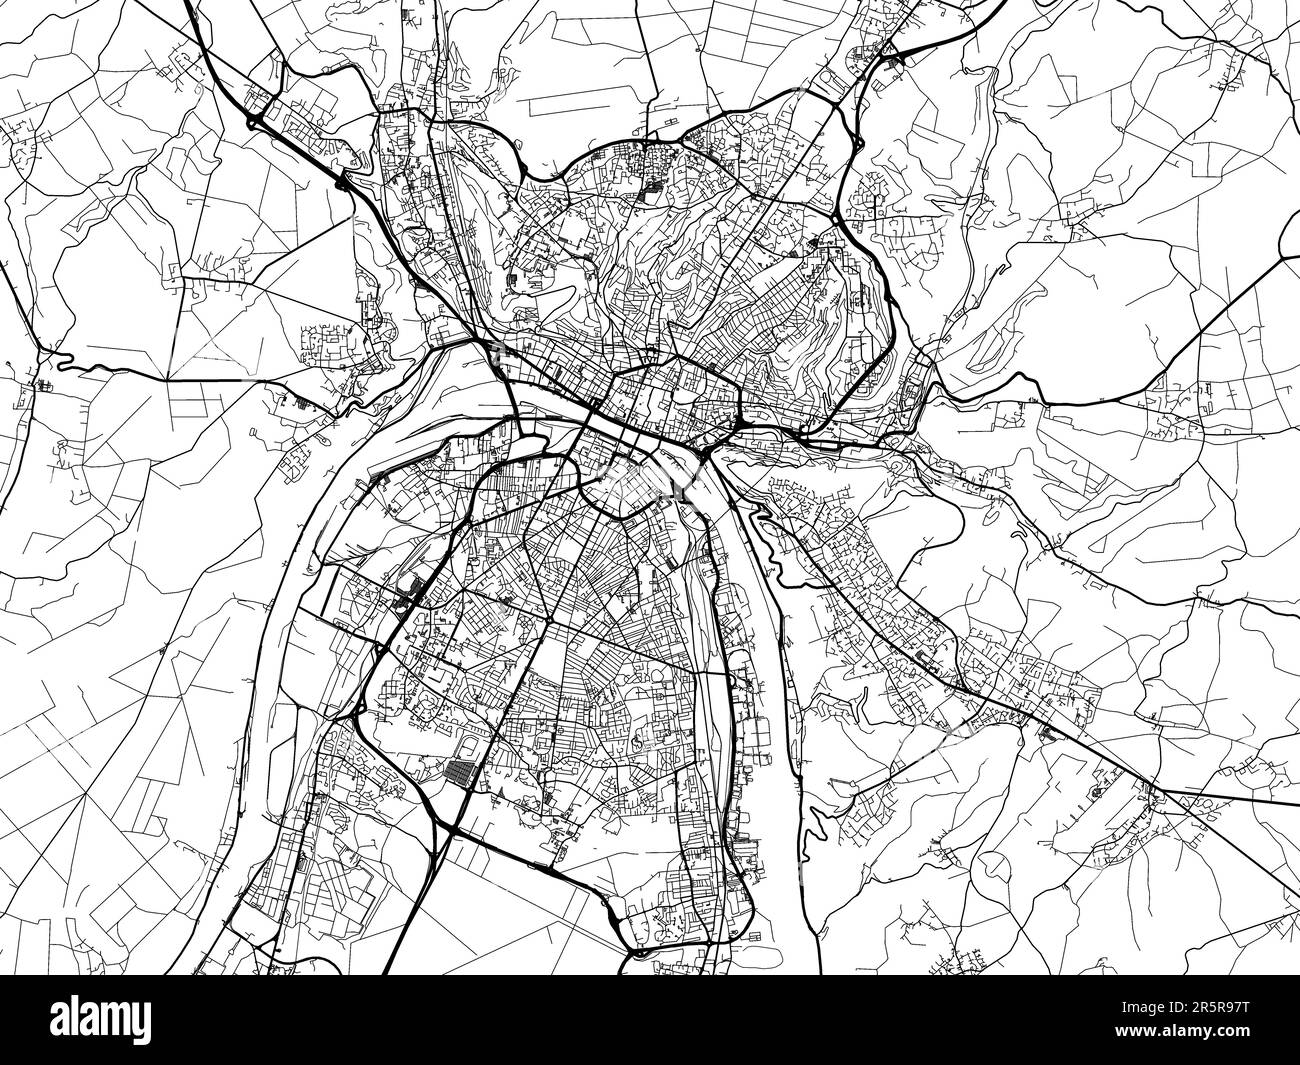 Road map of the city of  Rouen in France on a white background. Stock Photo